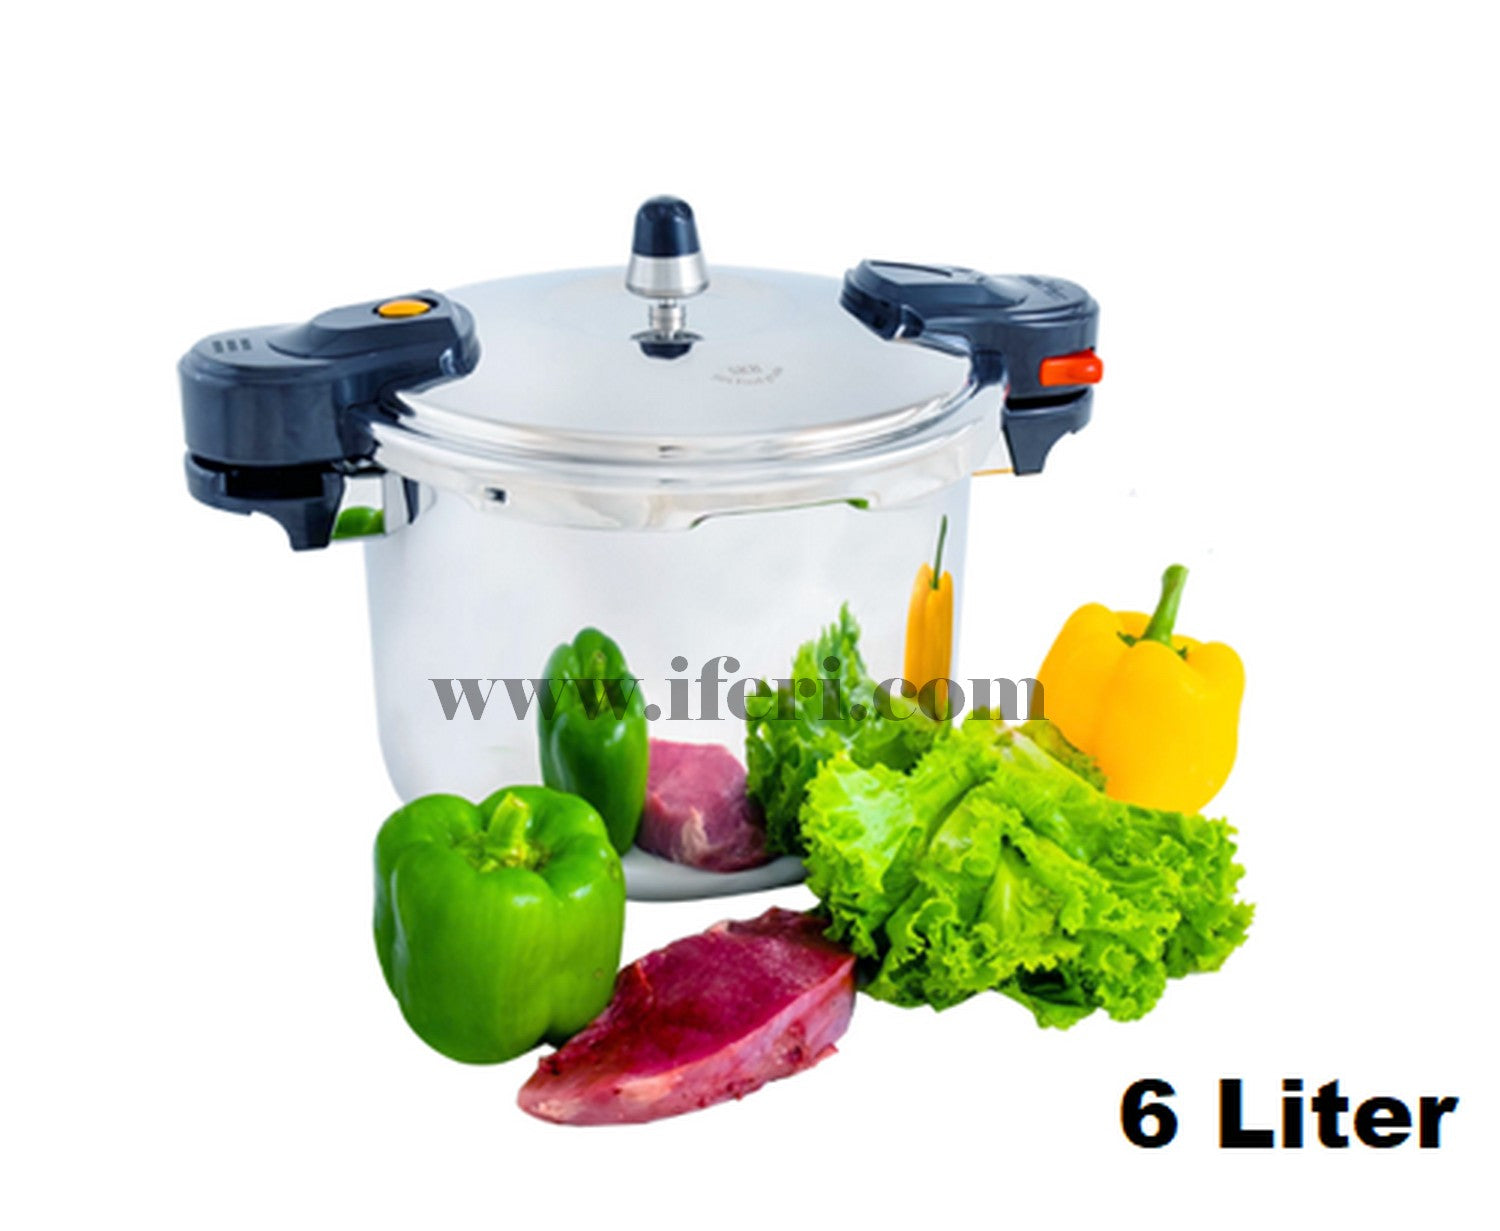 SKB 6 Liter Stainless Steel 3 ply Pressure Cooker 3P-PC-06